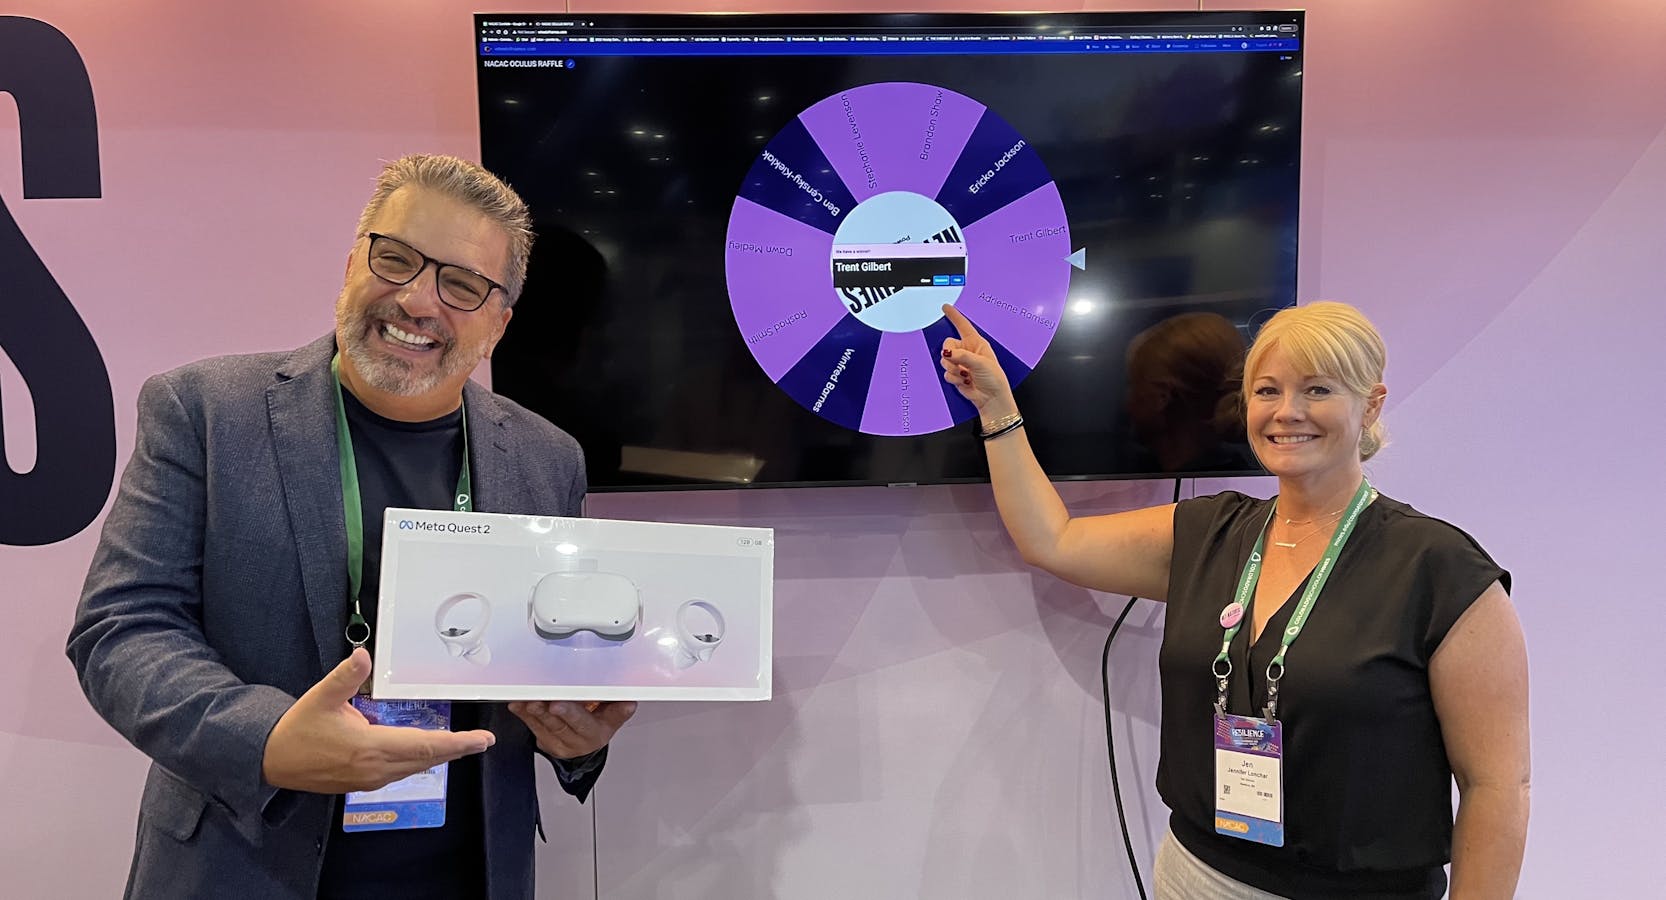 One person won an Oculus Quest at our booth.